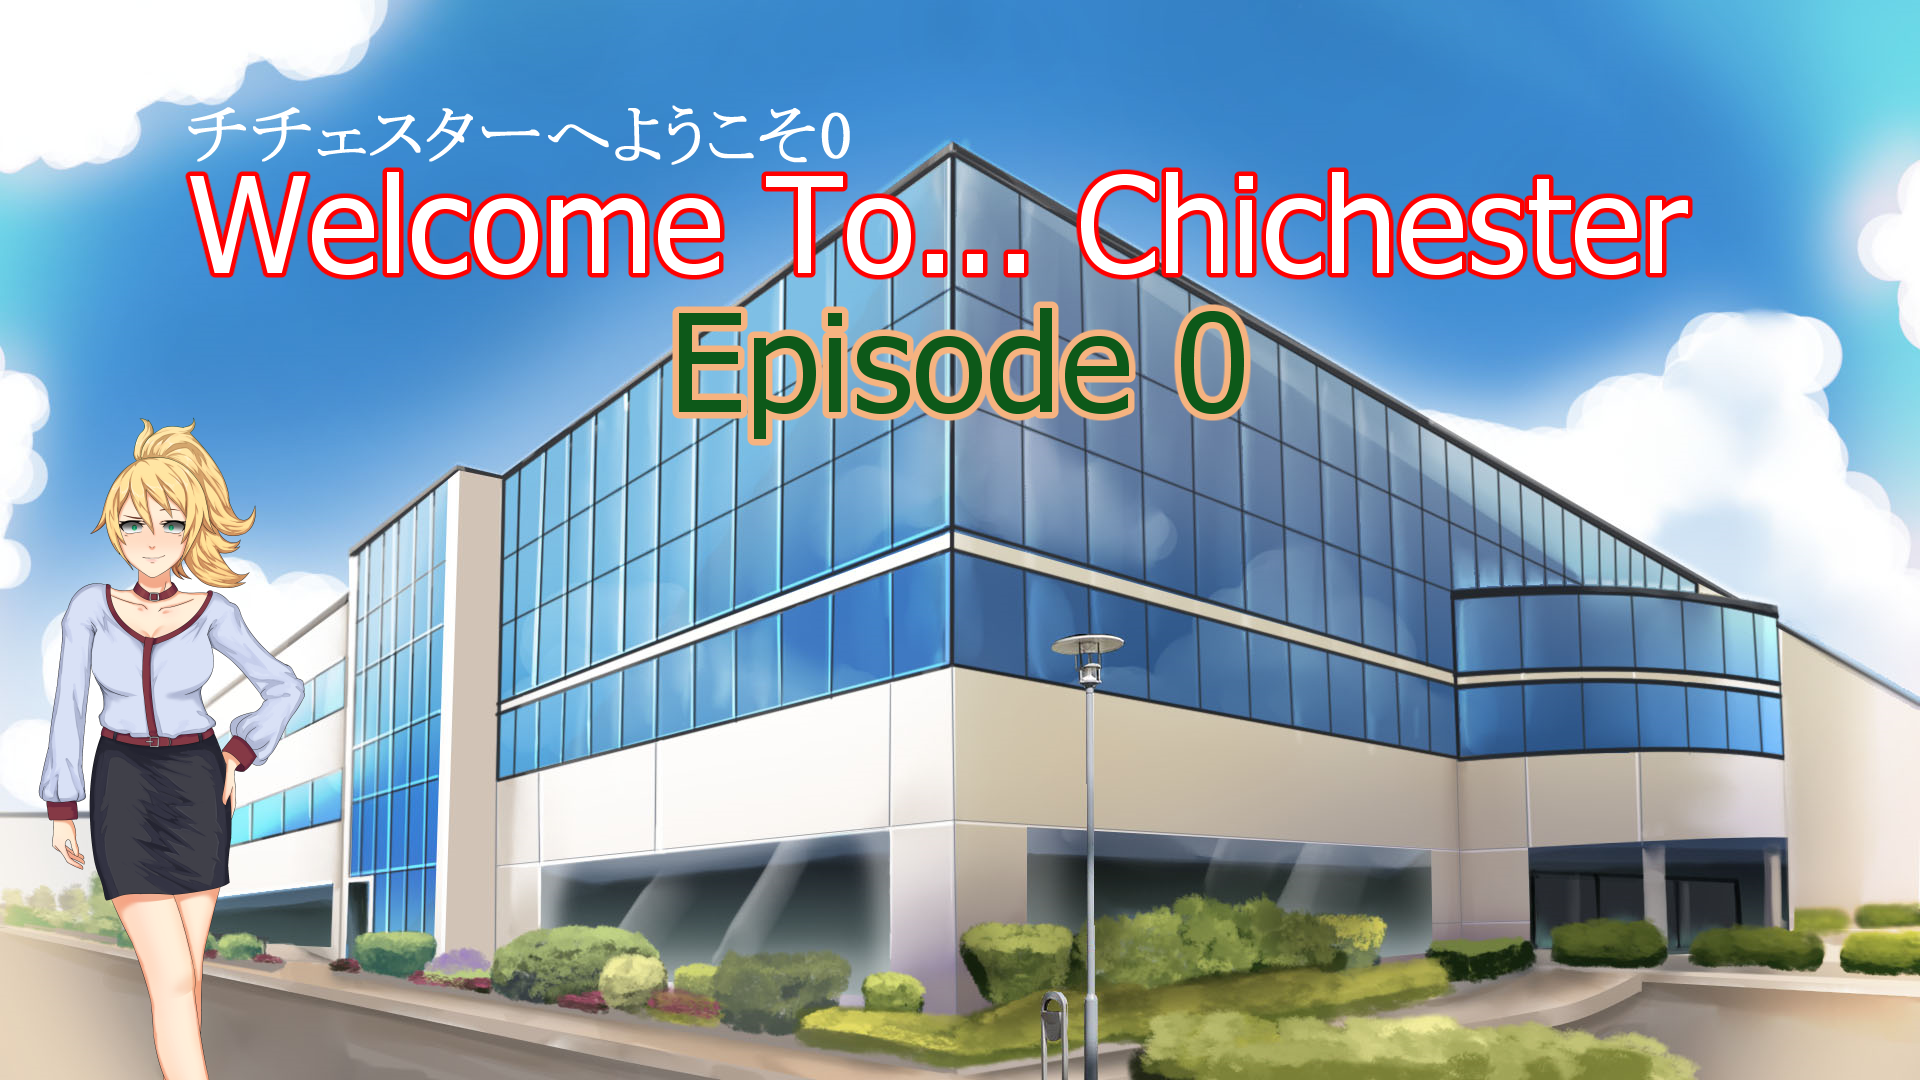 Welcome To... Chichester : Episode 0